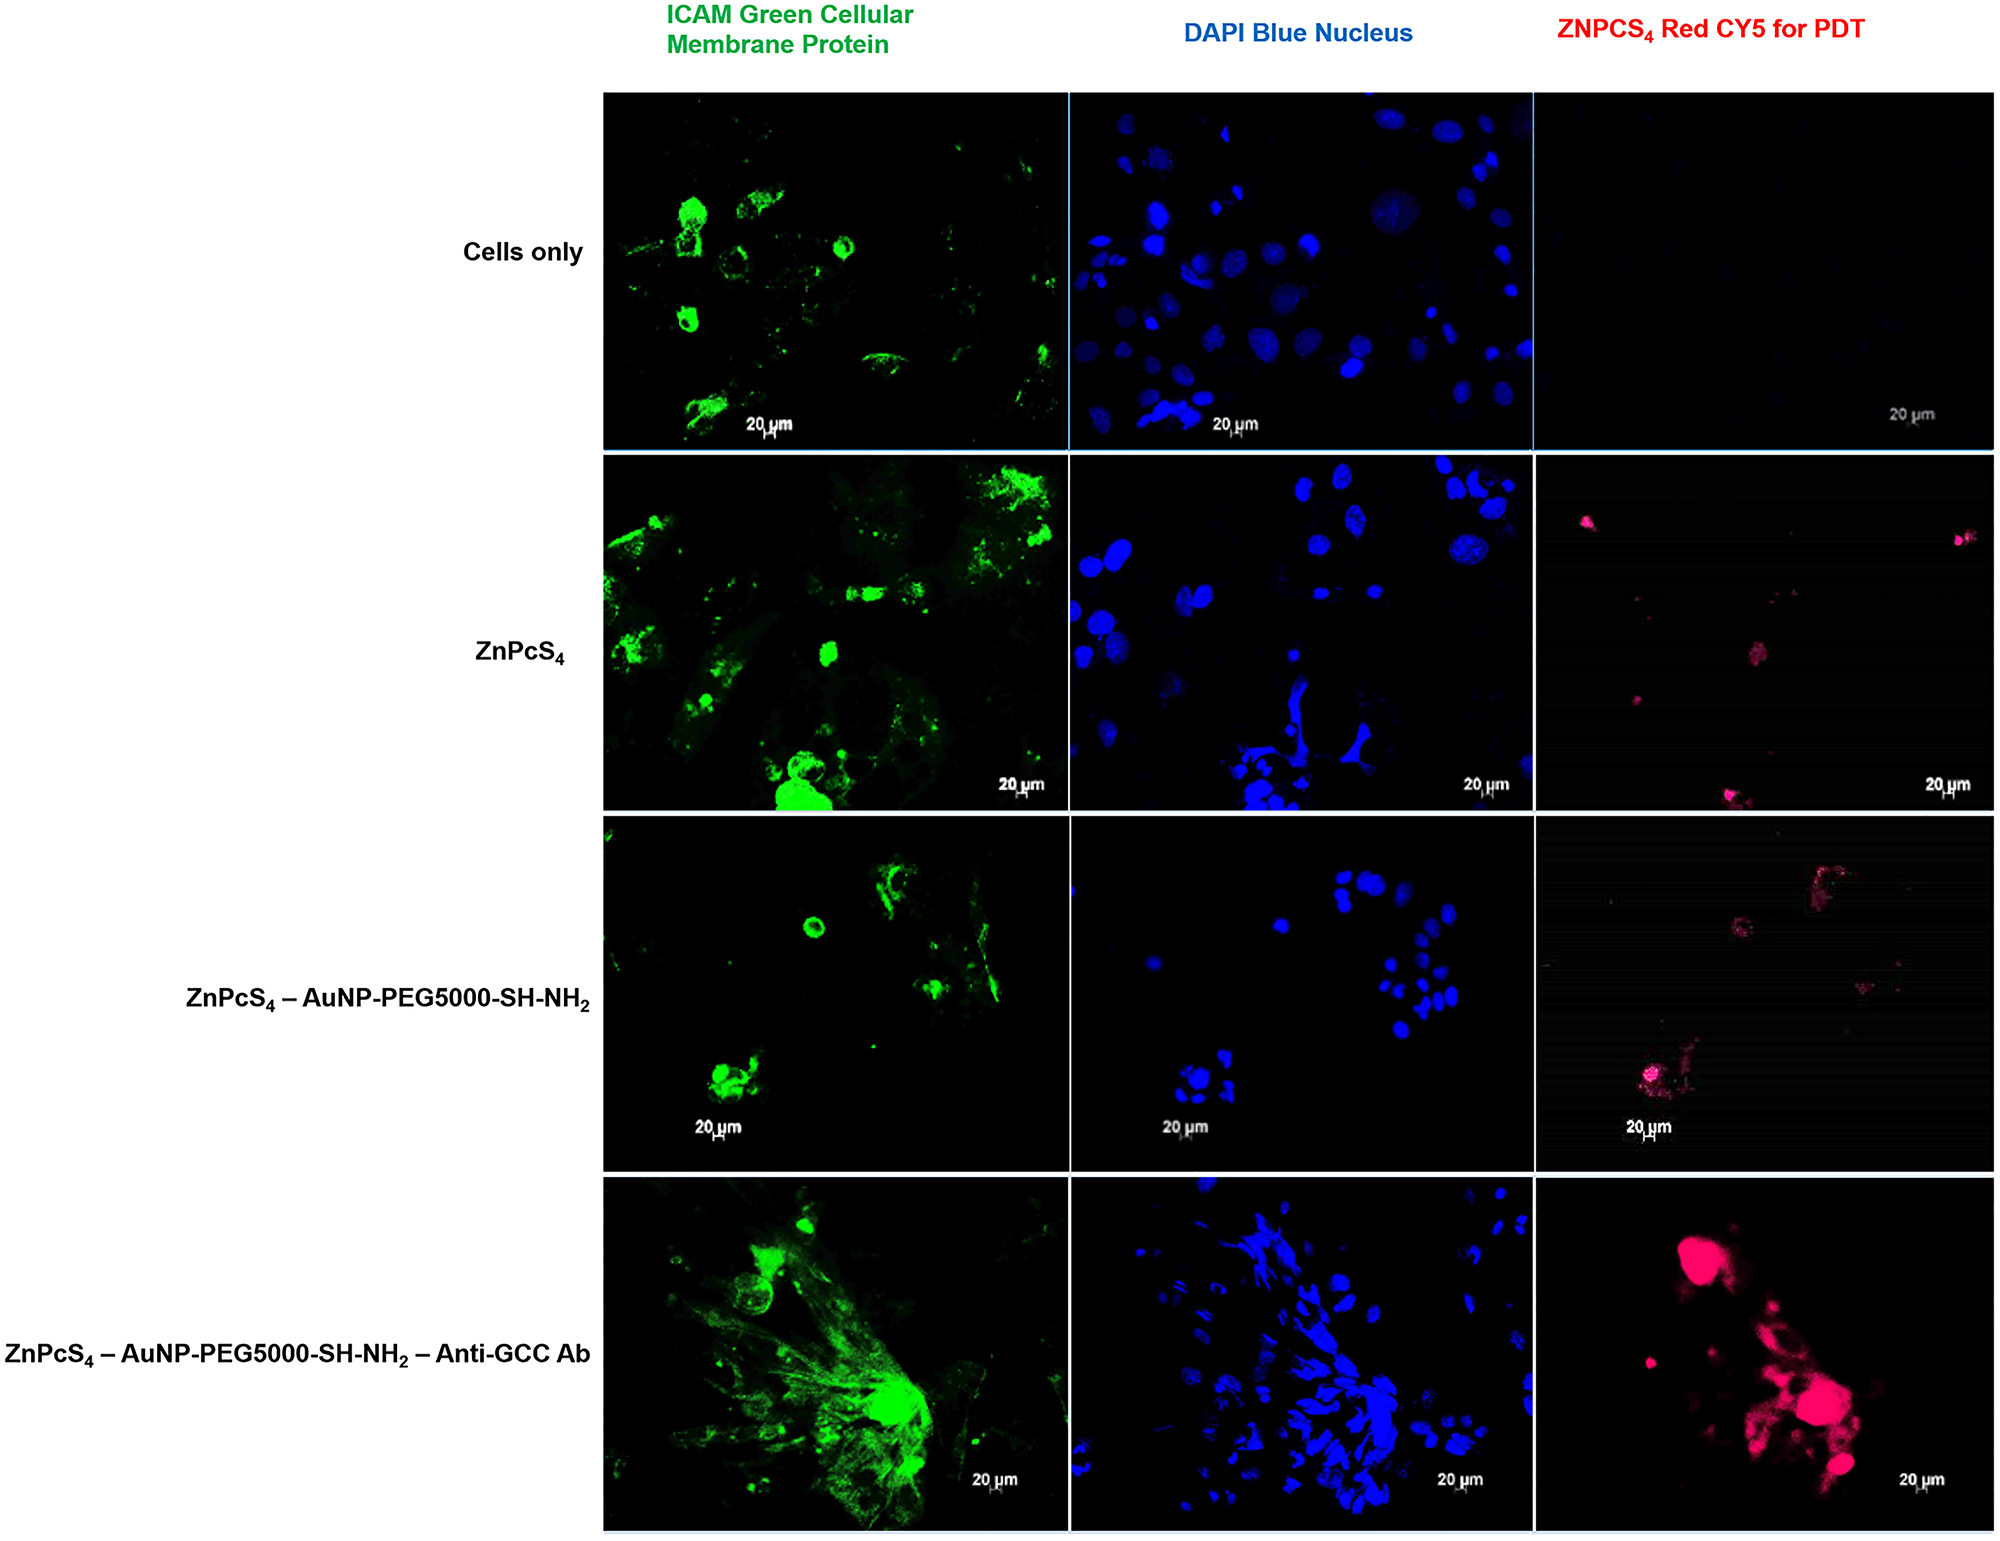 Subcellular localization comparison of ZnPcS4 PS uptake in CaCo-2 cells, treated with ZnPcS4 PS alone, PS-AuNP and FNBC after 24 h of incubation.